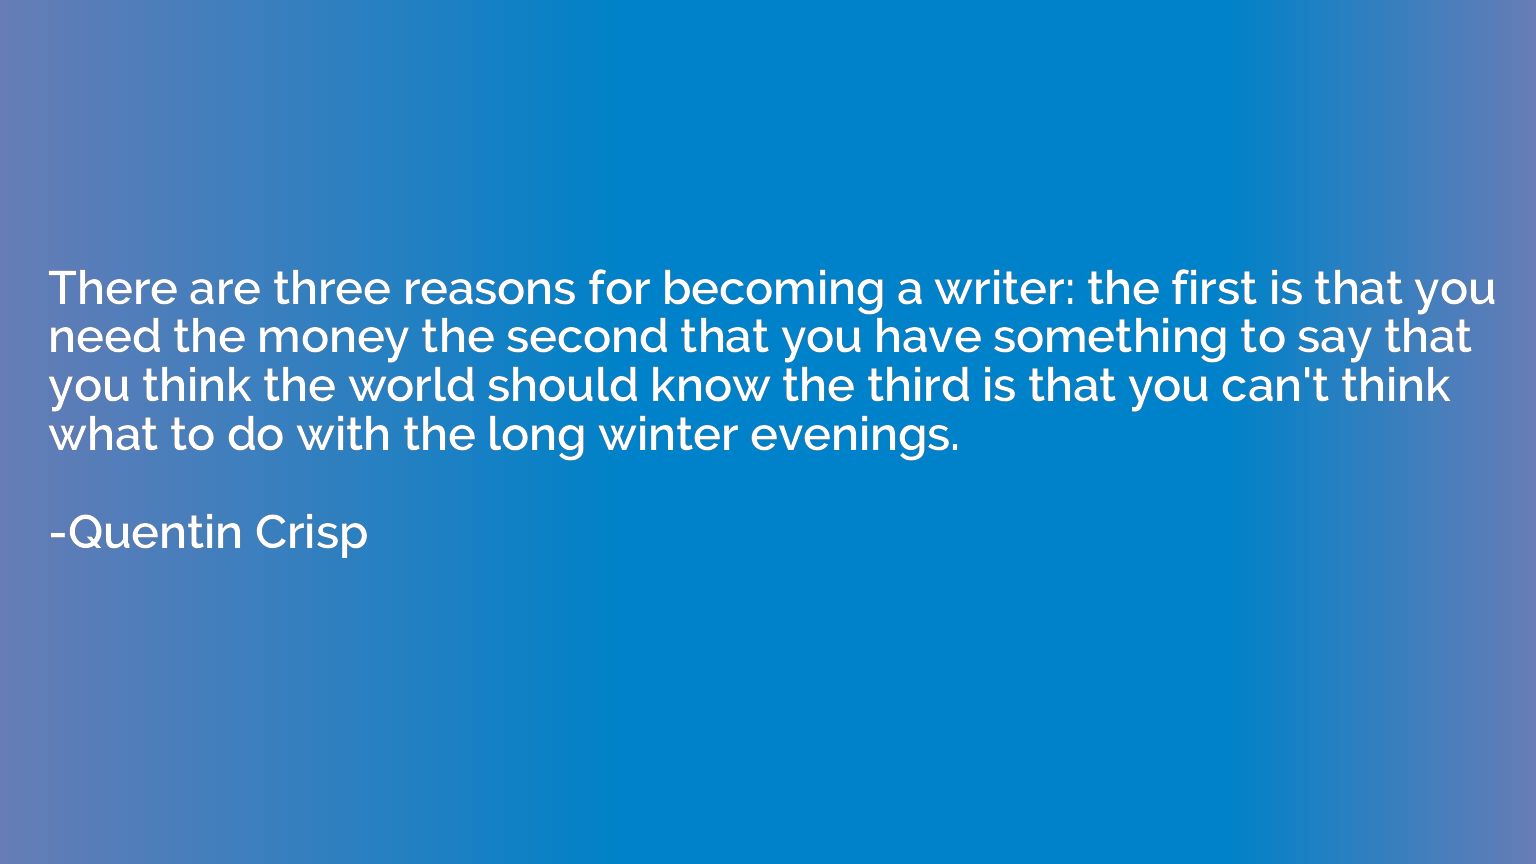 There are three reasons for becoming a writer: the first is 